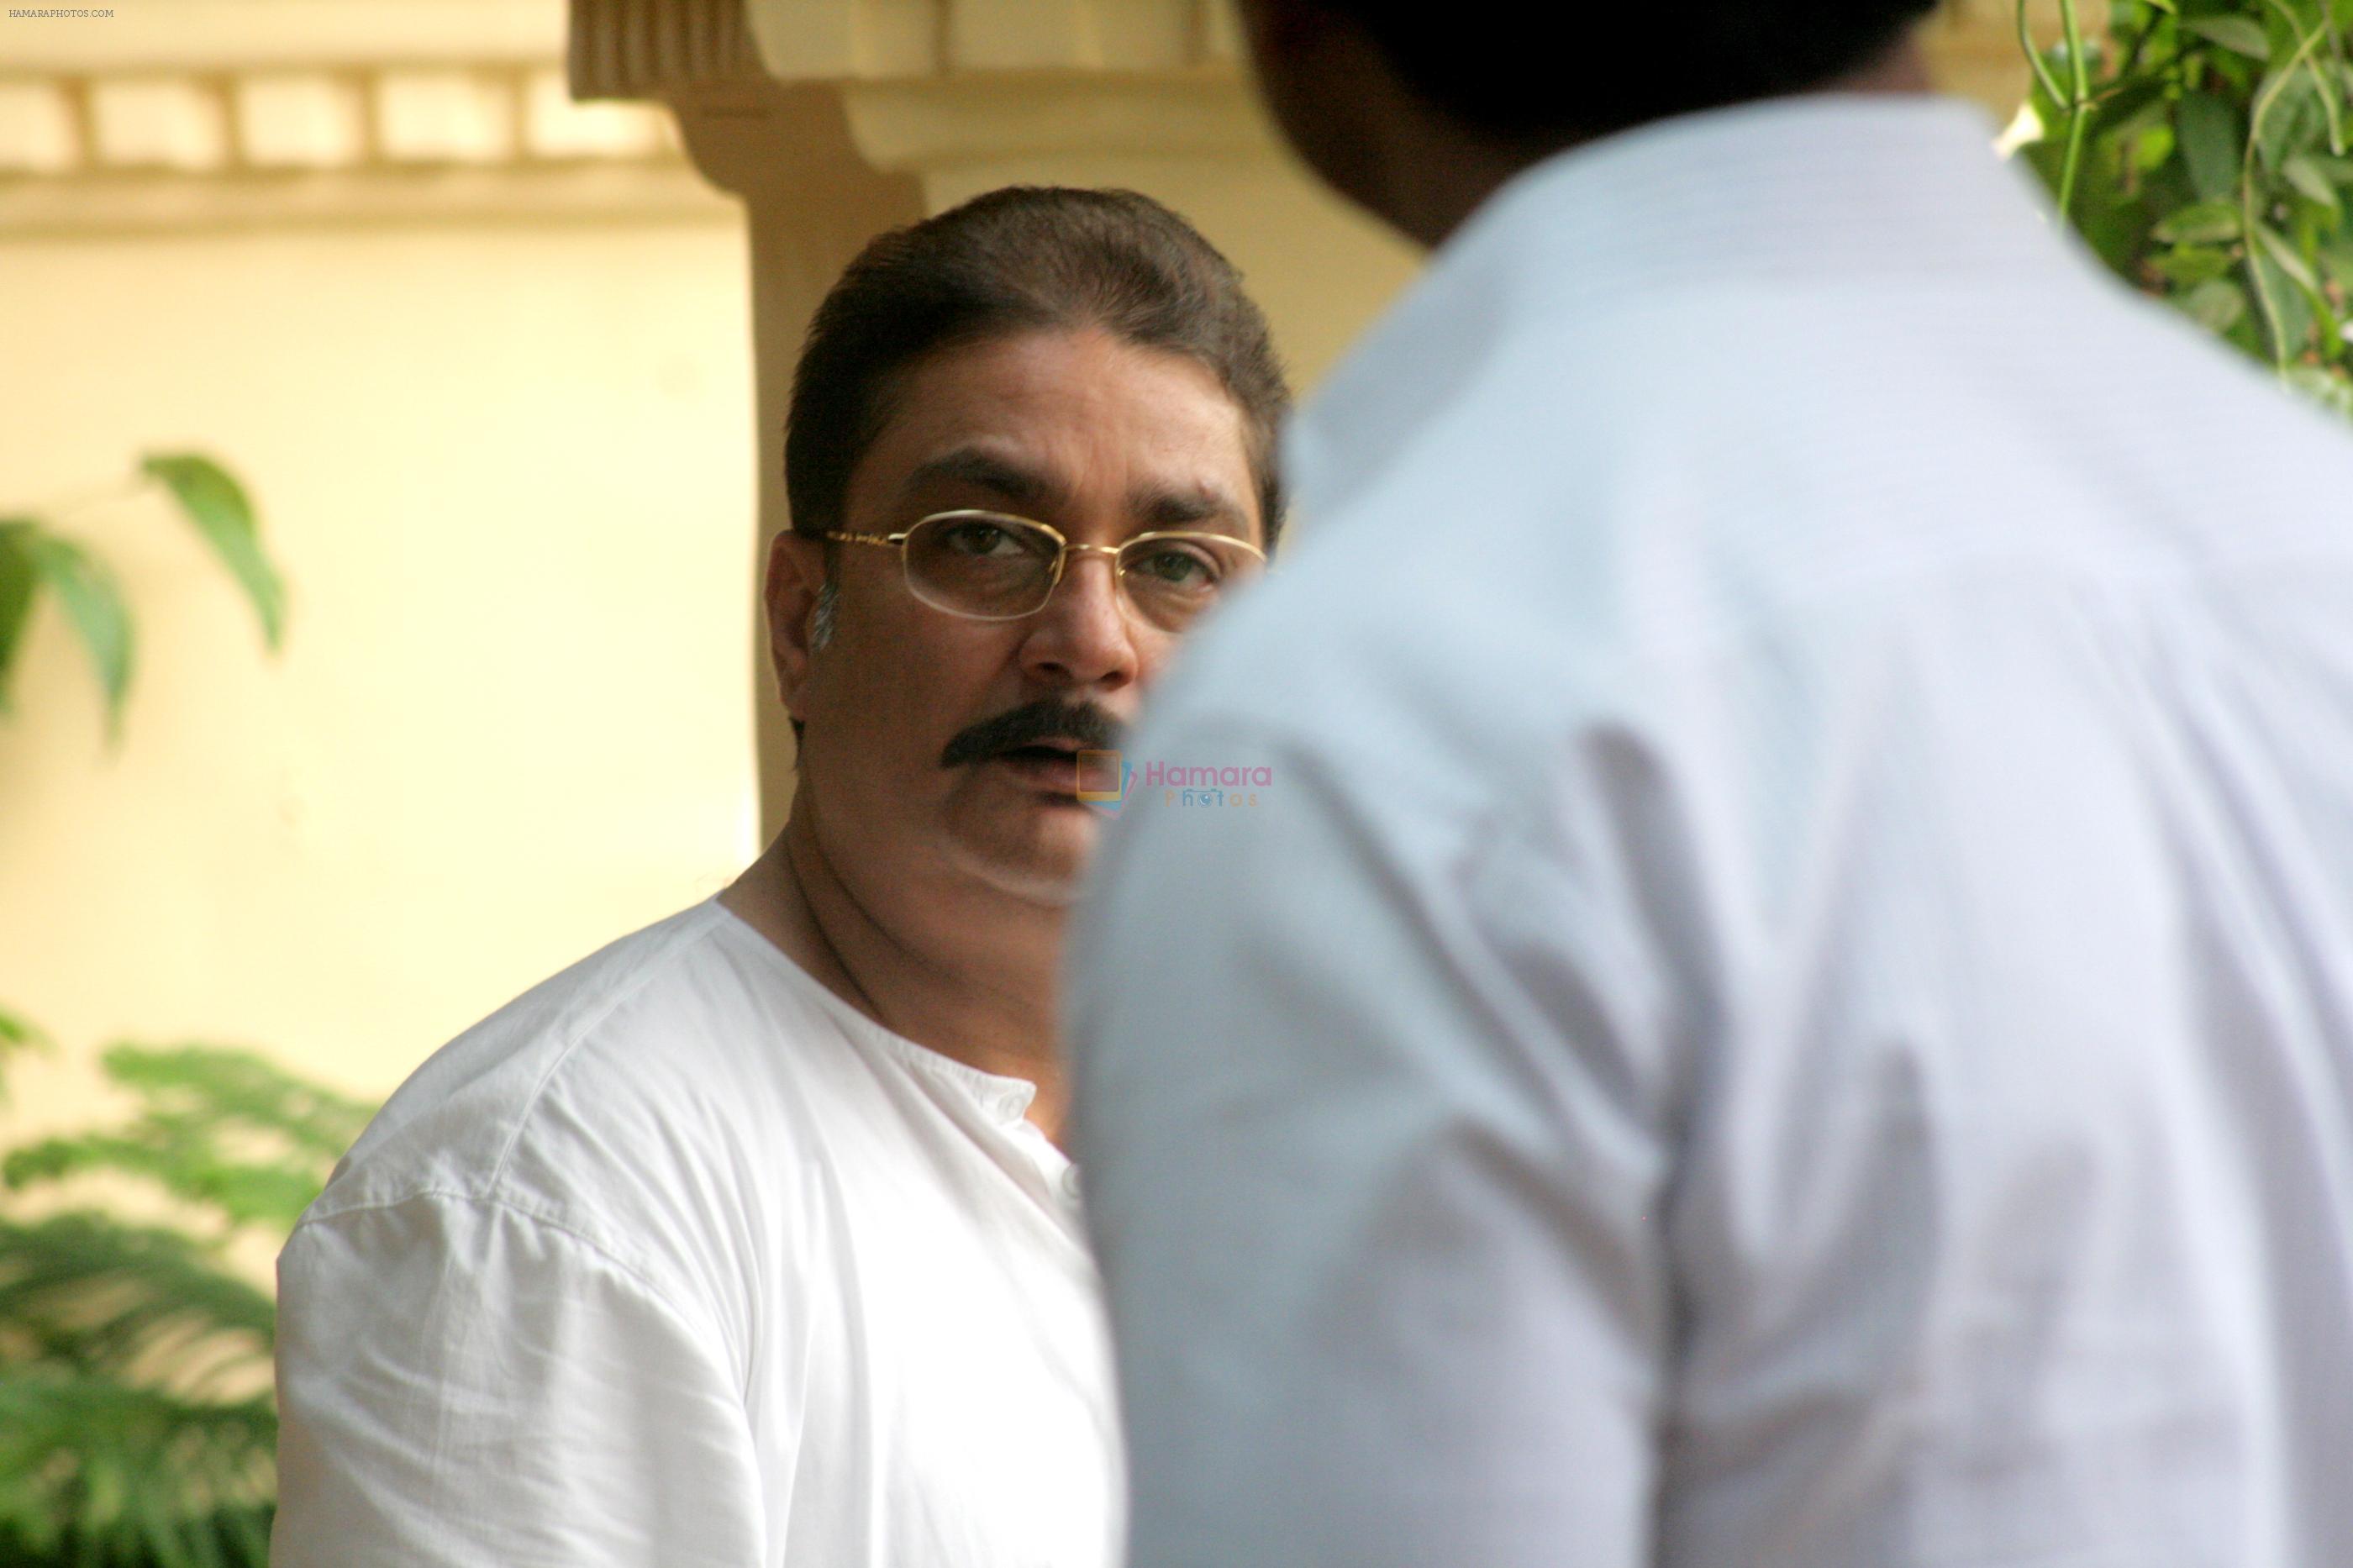 Vinay Pathak in the still from movie Maximum